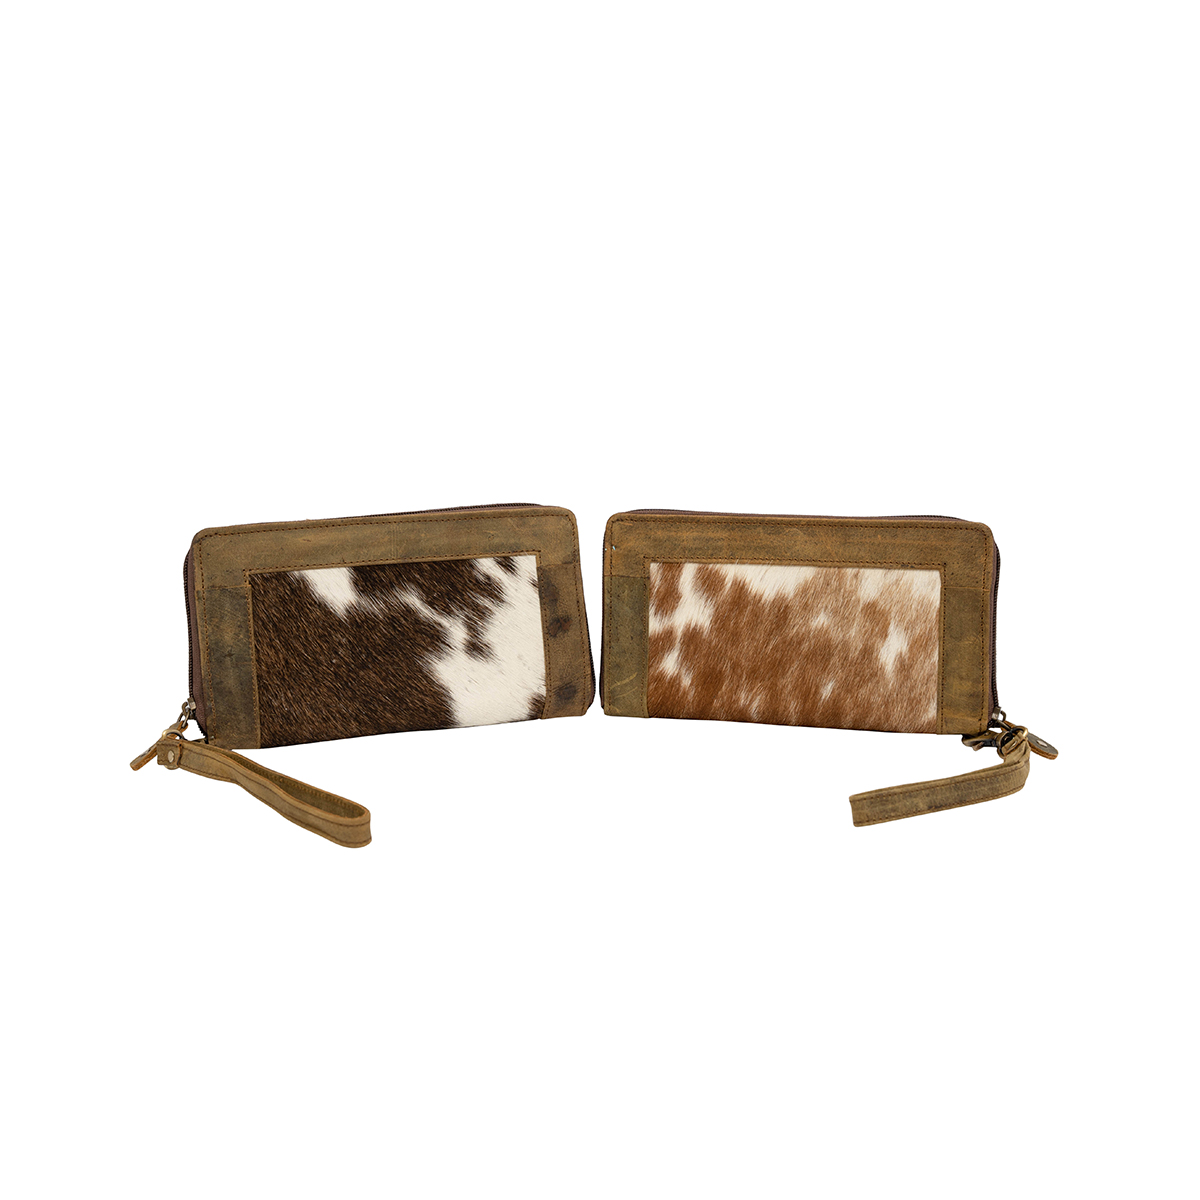 Cowhide with Zipper Edge Wallet